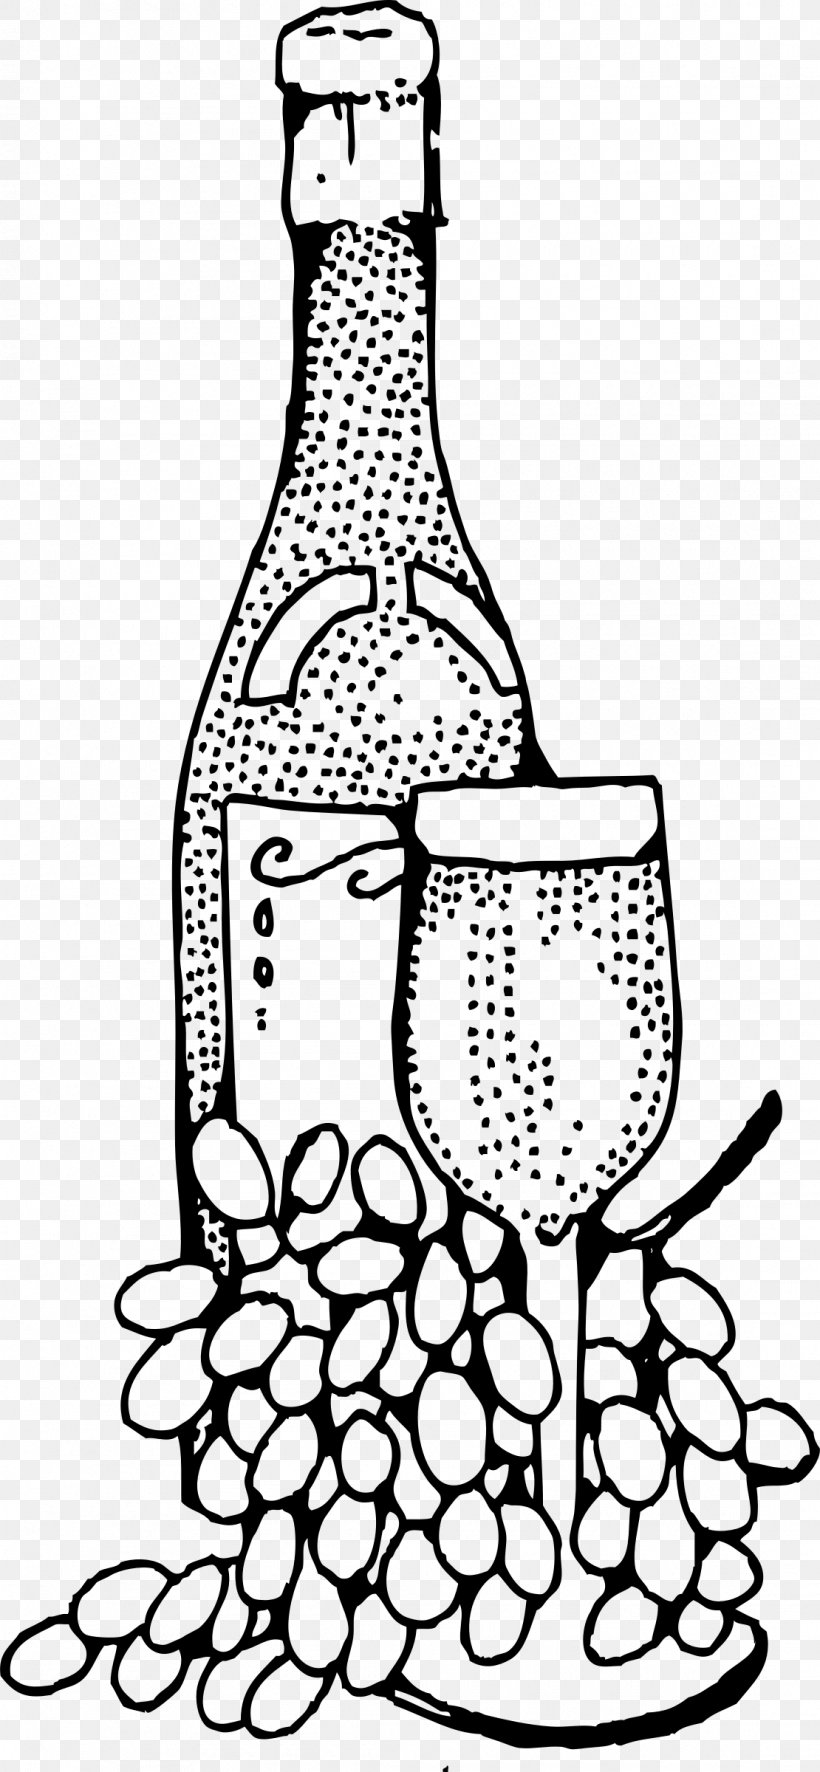 Wine Bottle Ready-to-Use Food And Drink Spot Illustrations Clip Art, PNG, 1110x2400px, Wine, Beer, Black And White, Bottle, Drawing Download Free